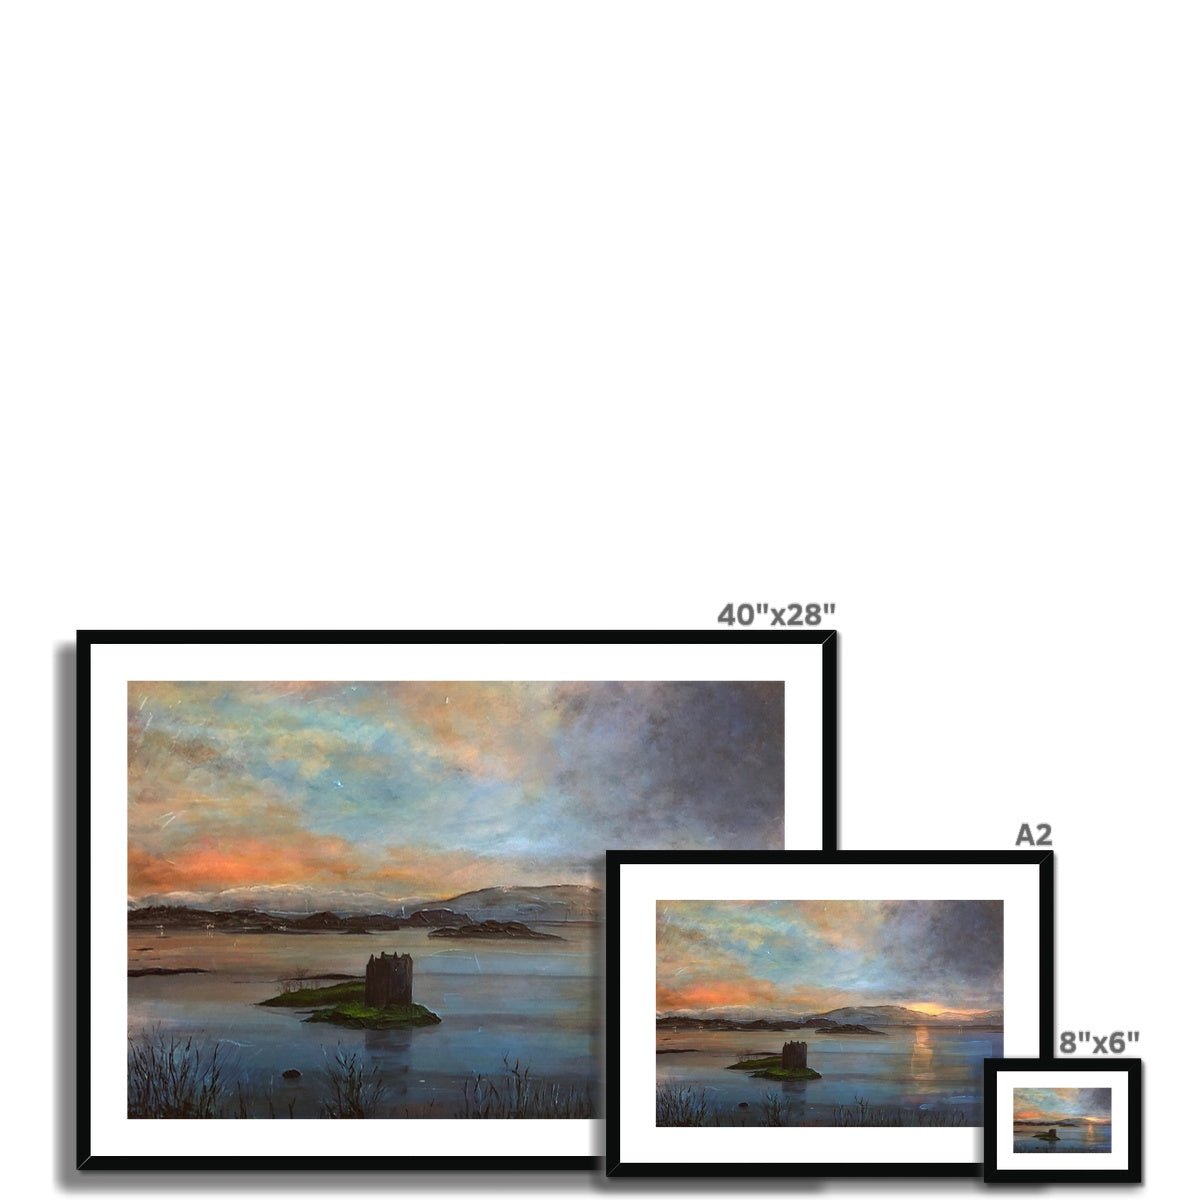 Castle Stalker Twilight Painting | Framed & Mounted Prints From Scotland-Framed & Mounted Prints-Historic & Iconic Scotland Art Gallery-Paintings, Prints, Homeware, Art Gifts From Scotland By Scottish Artist Kevin Hunter